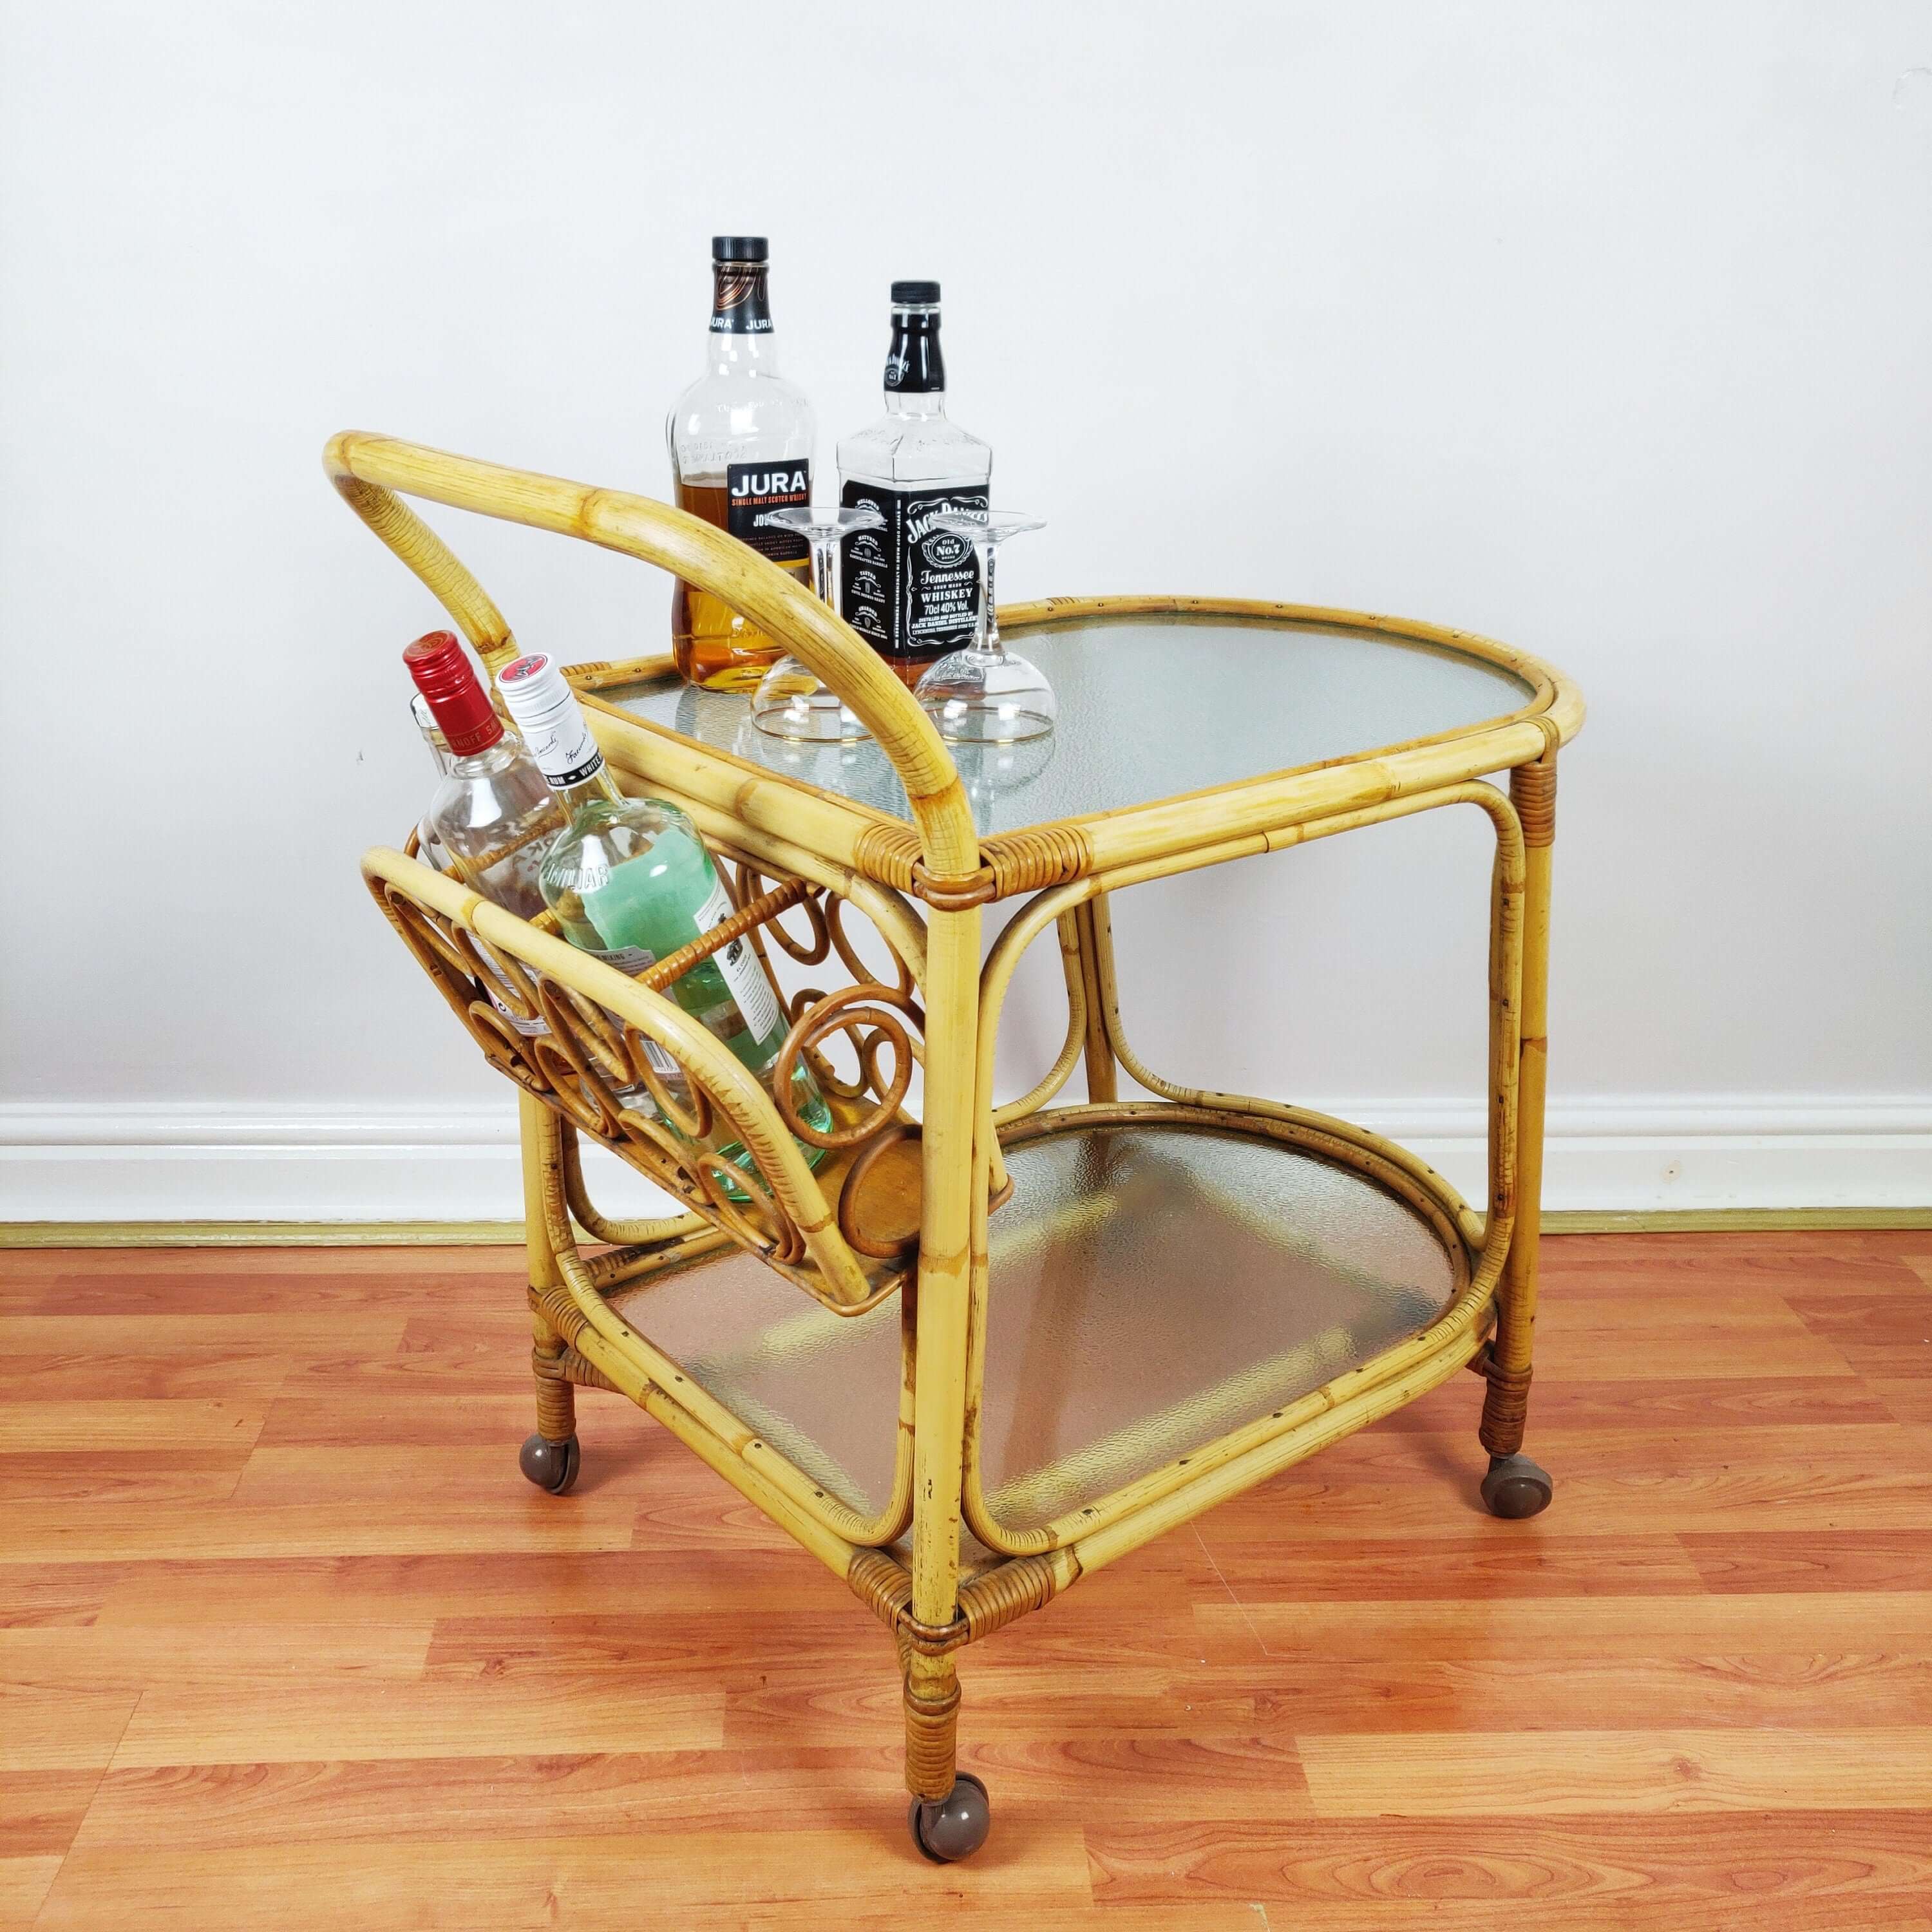 Vintage Bamboo Drinks Trolley by Angrave's Invincible back